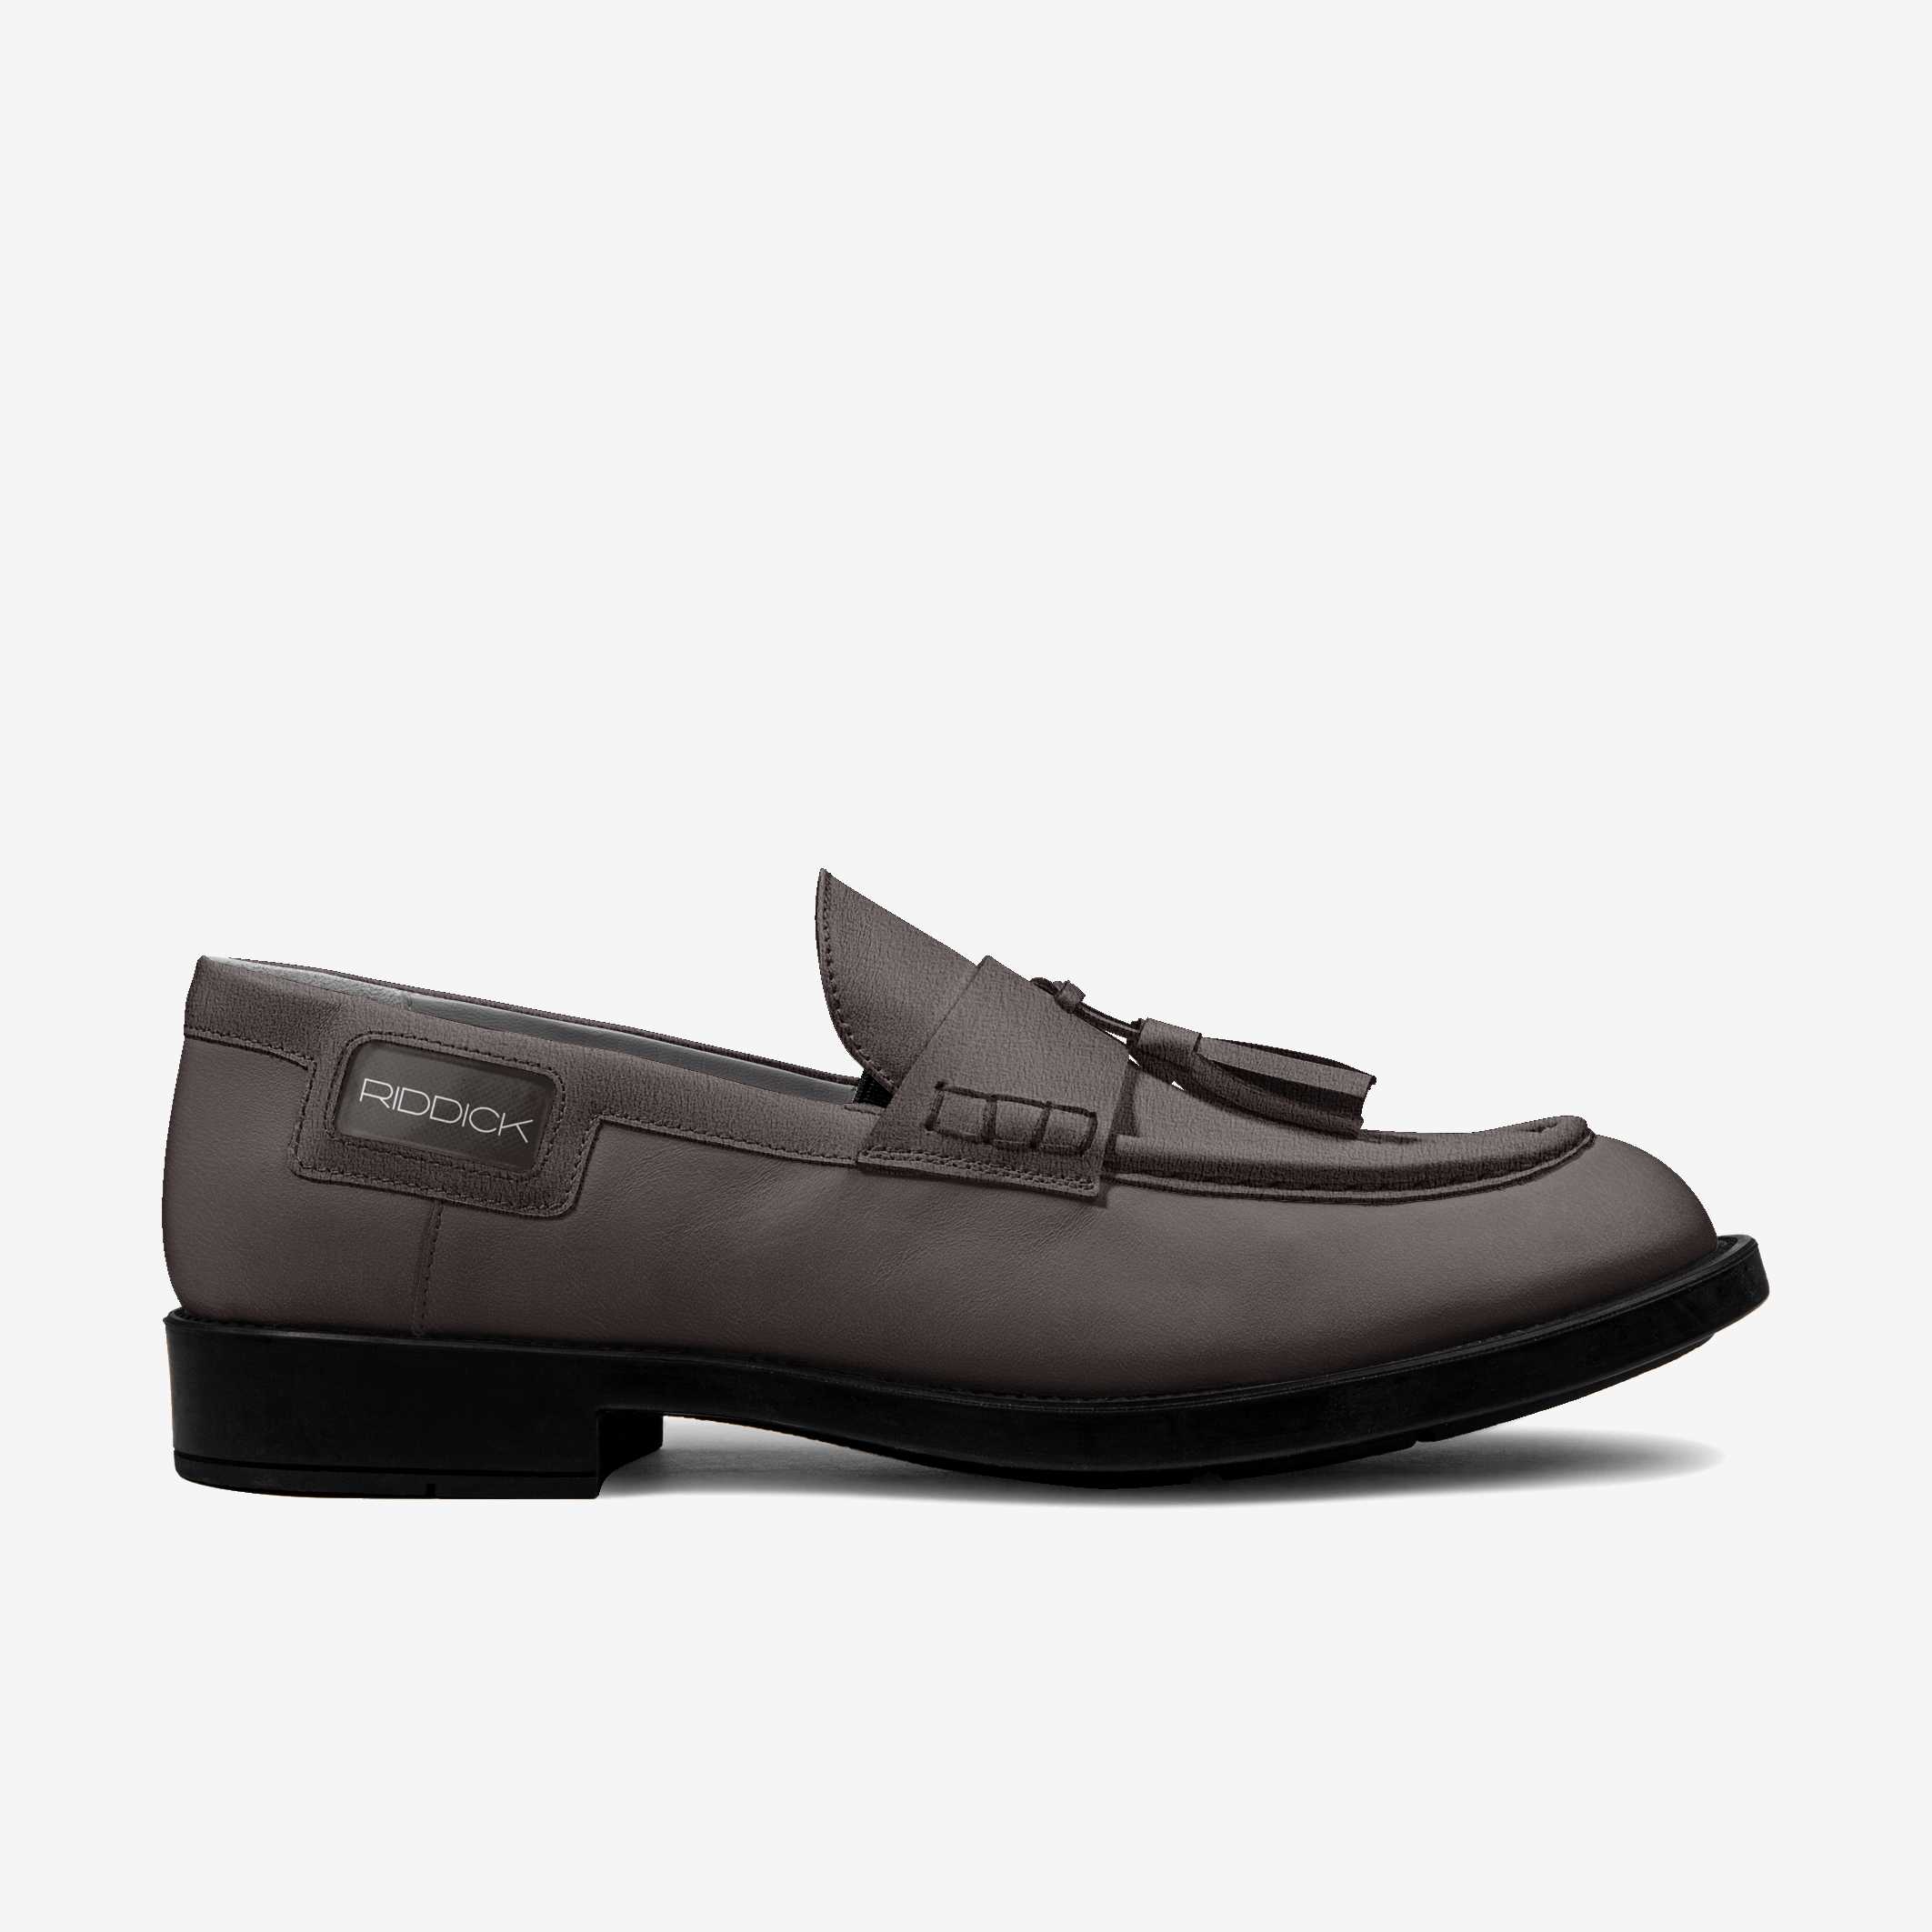 EXEC, THE TASSEL (IN TOBACCO) - Riddick Shoes Shoe Riddick Shoes   